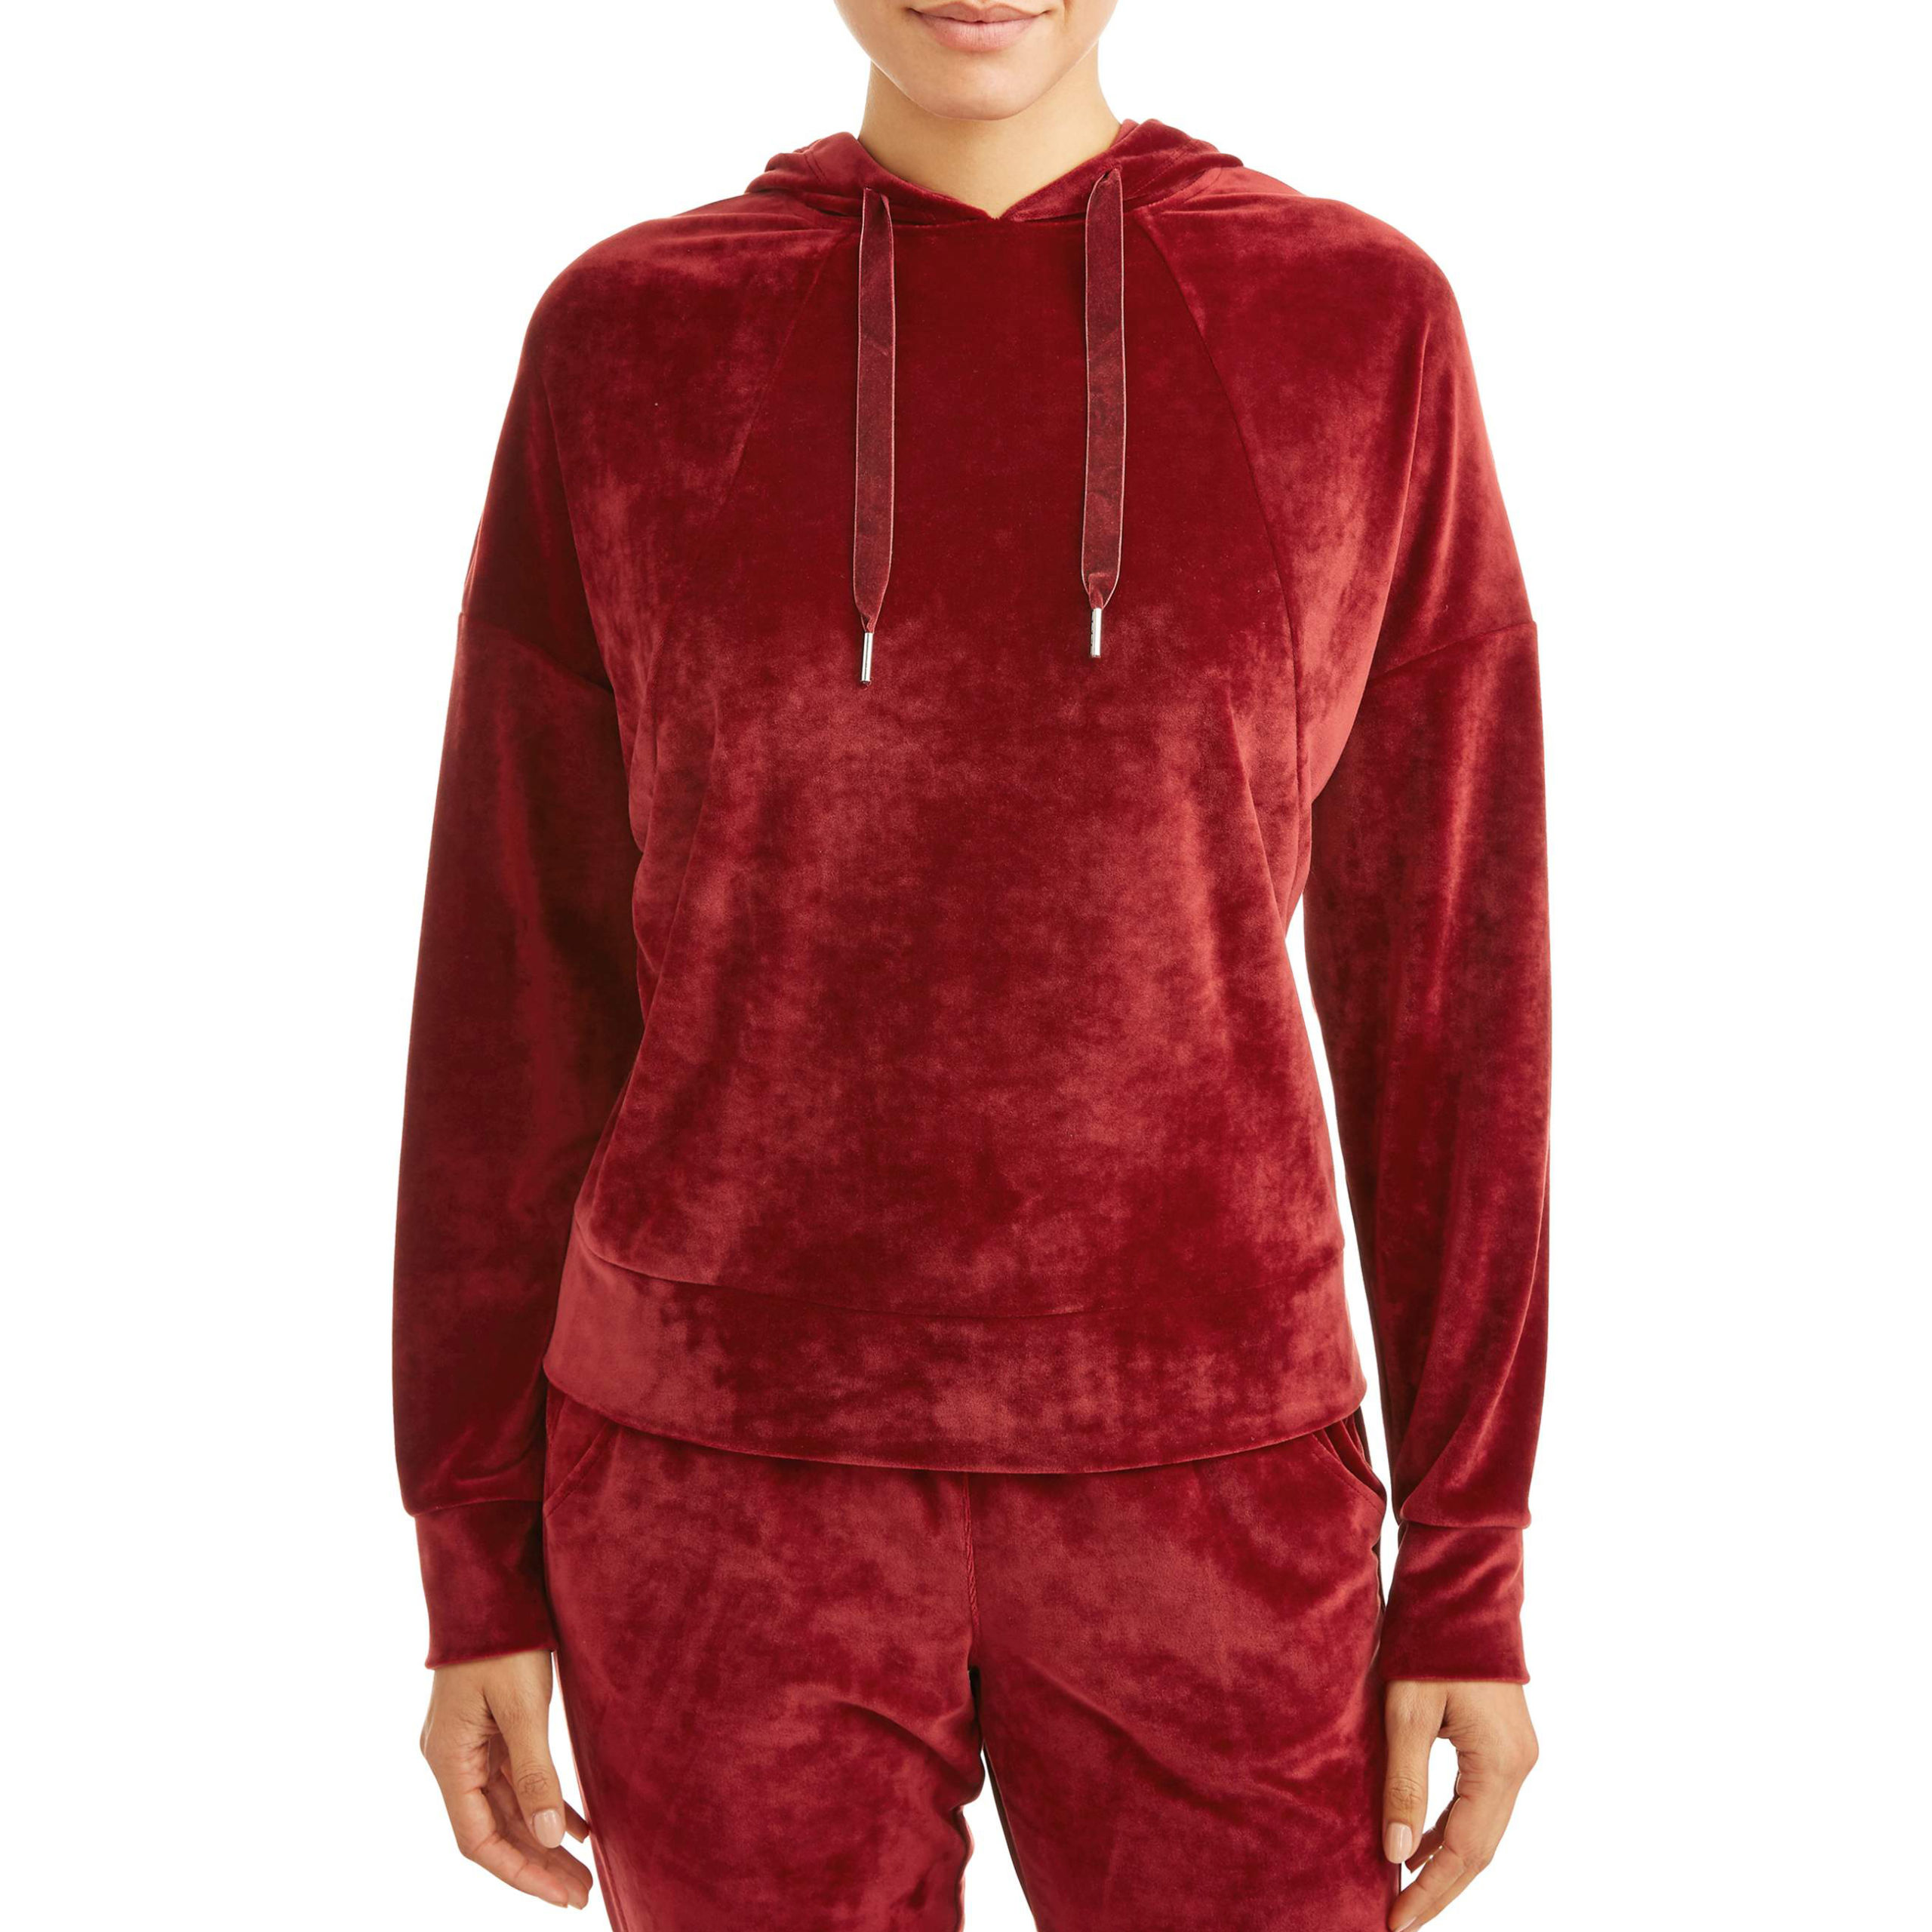 Women Track Suit – Chiton Wears